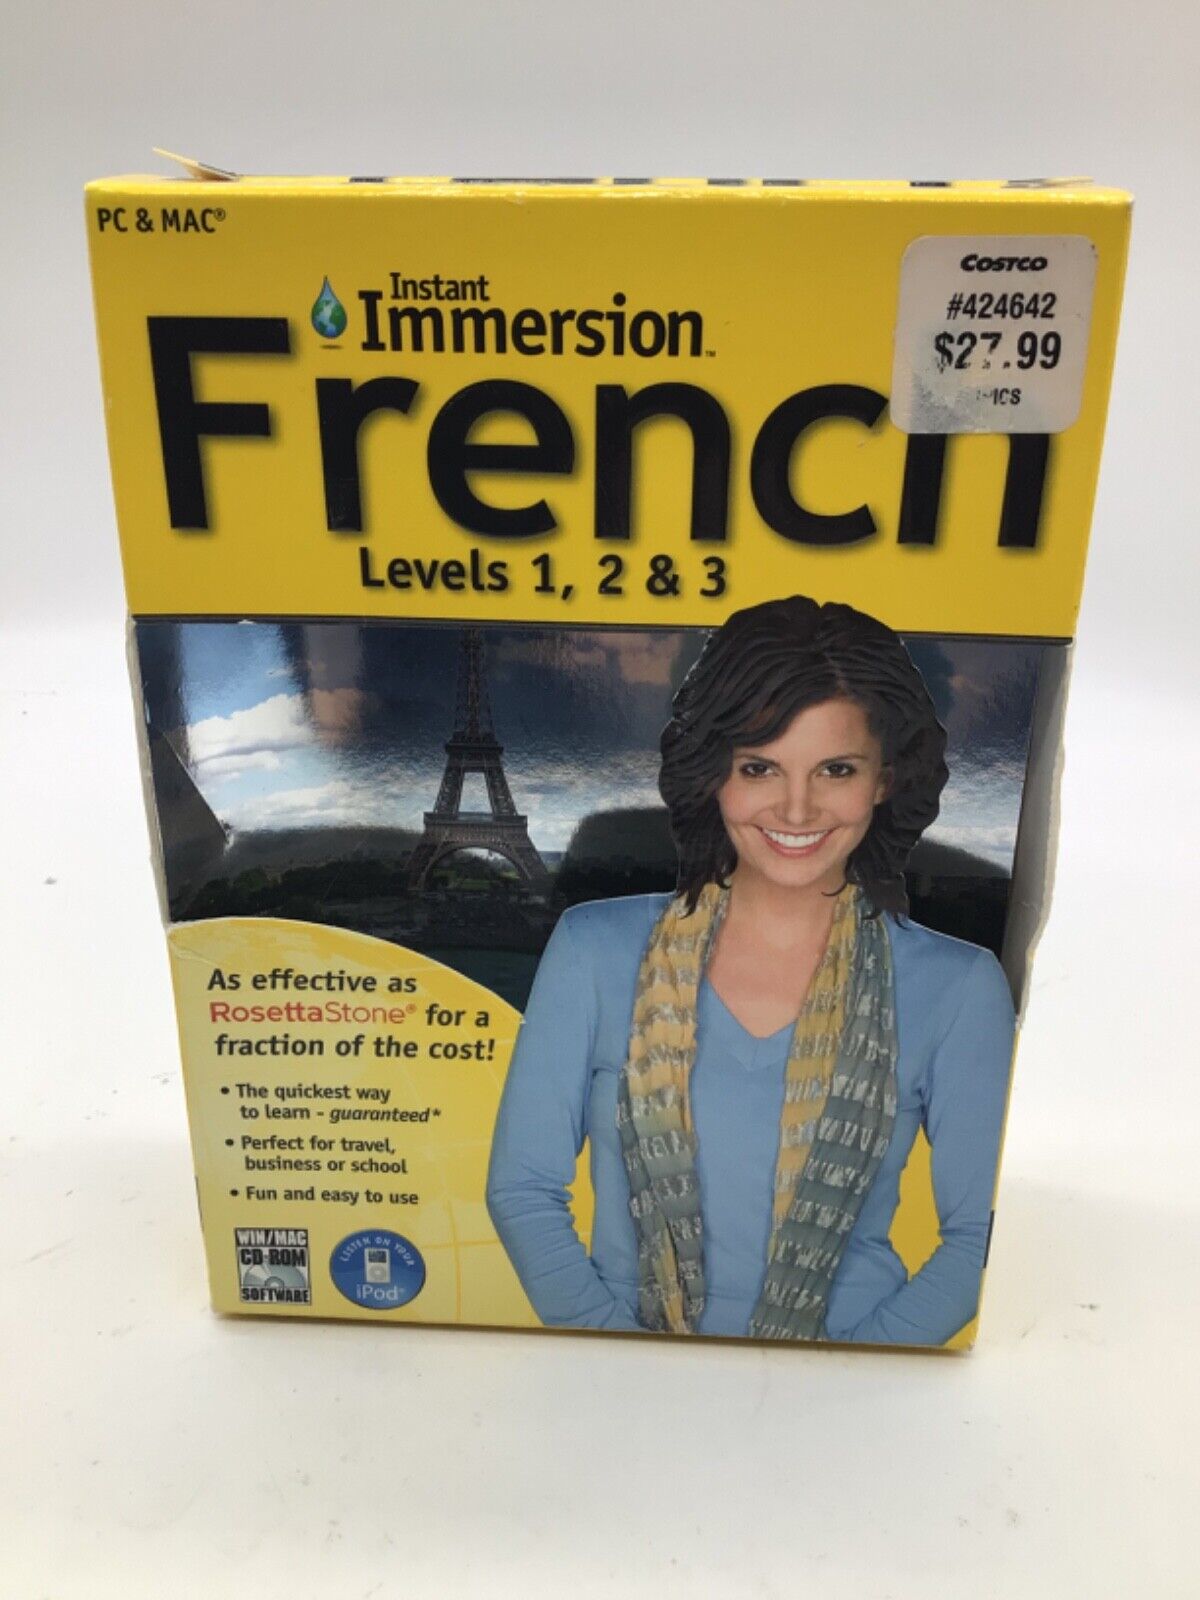 Instant Immersion French Levels 1, 2 & 3 (New in sealed box)